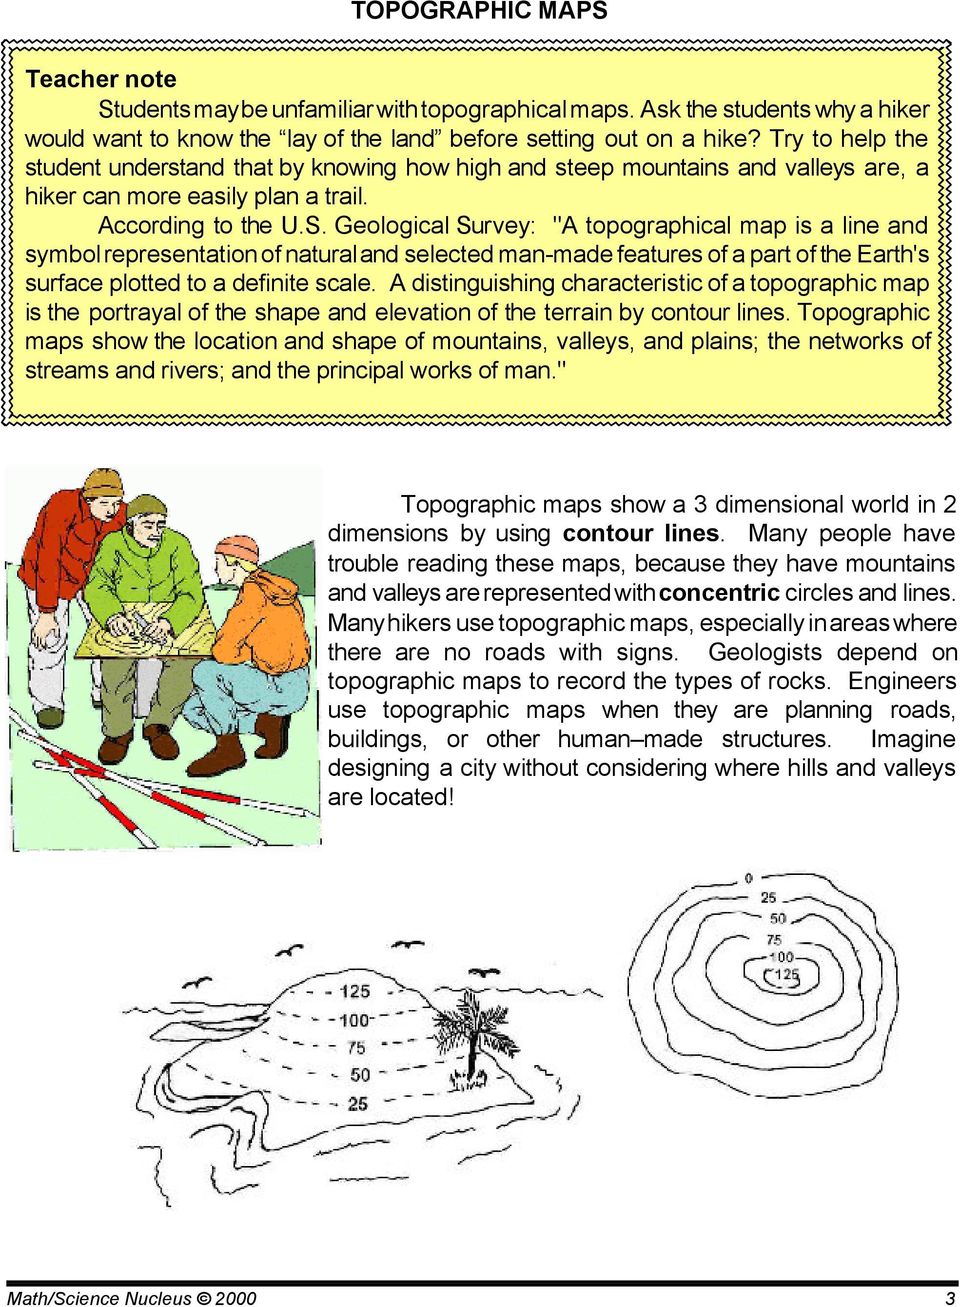 Geological Survey: "A topographical map is a line and symbol representation of natural and selected man-made features of a part of the Earth's surface plotted to a definite scale.